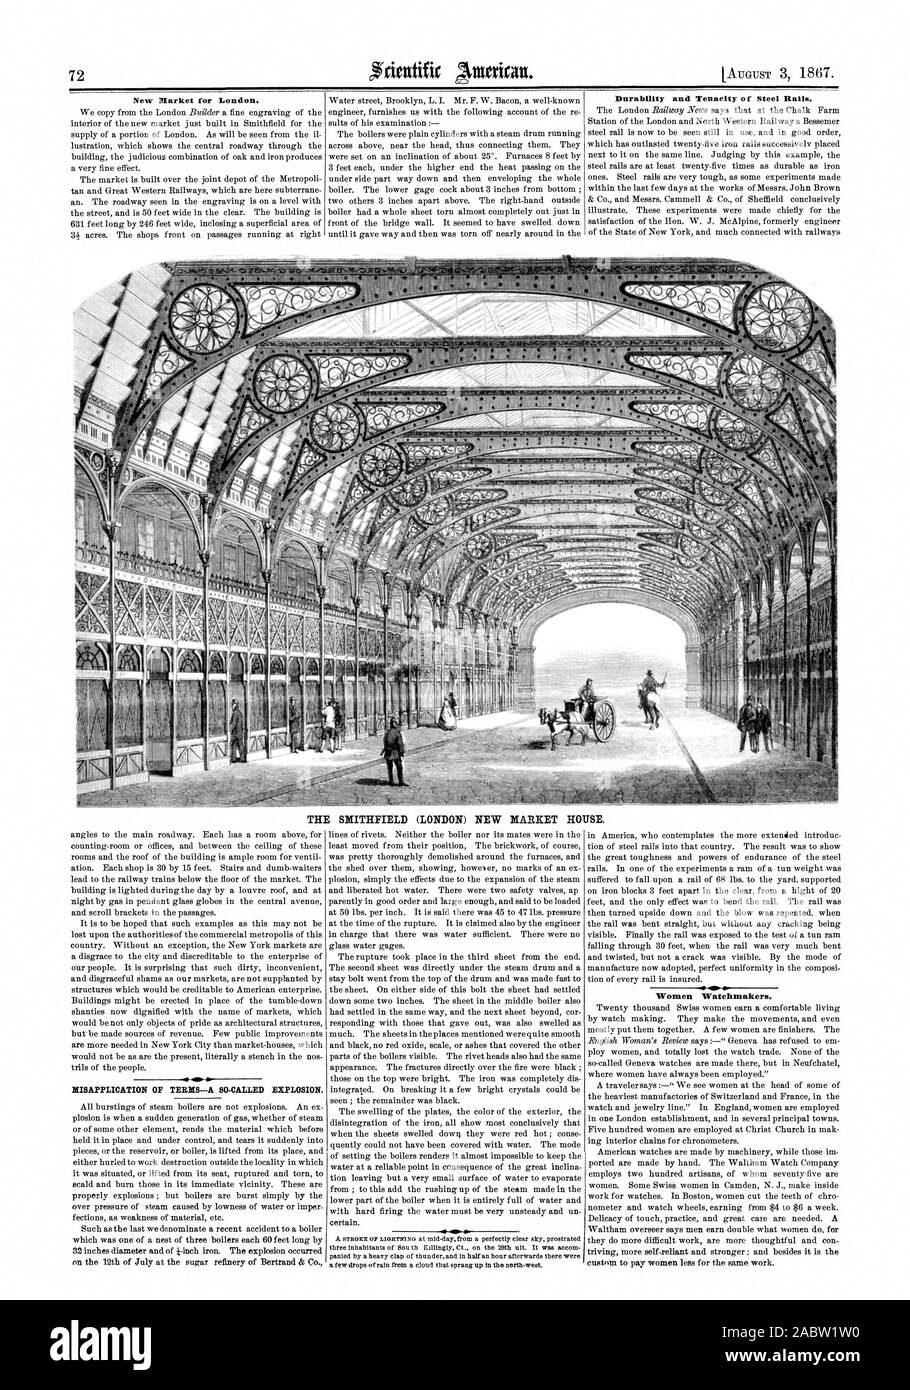 New Market for London. Durability and Tenacity of Steel Rails. THE SMITHFIELD (LONDON) NEW MARKET HOUSE. MISAPPLICATION OF TERMS--.A SO-CALLED EXPLOSION. Women Watchmakers., scientific american, 1867-08-03 Stock Photo